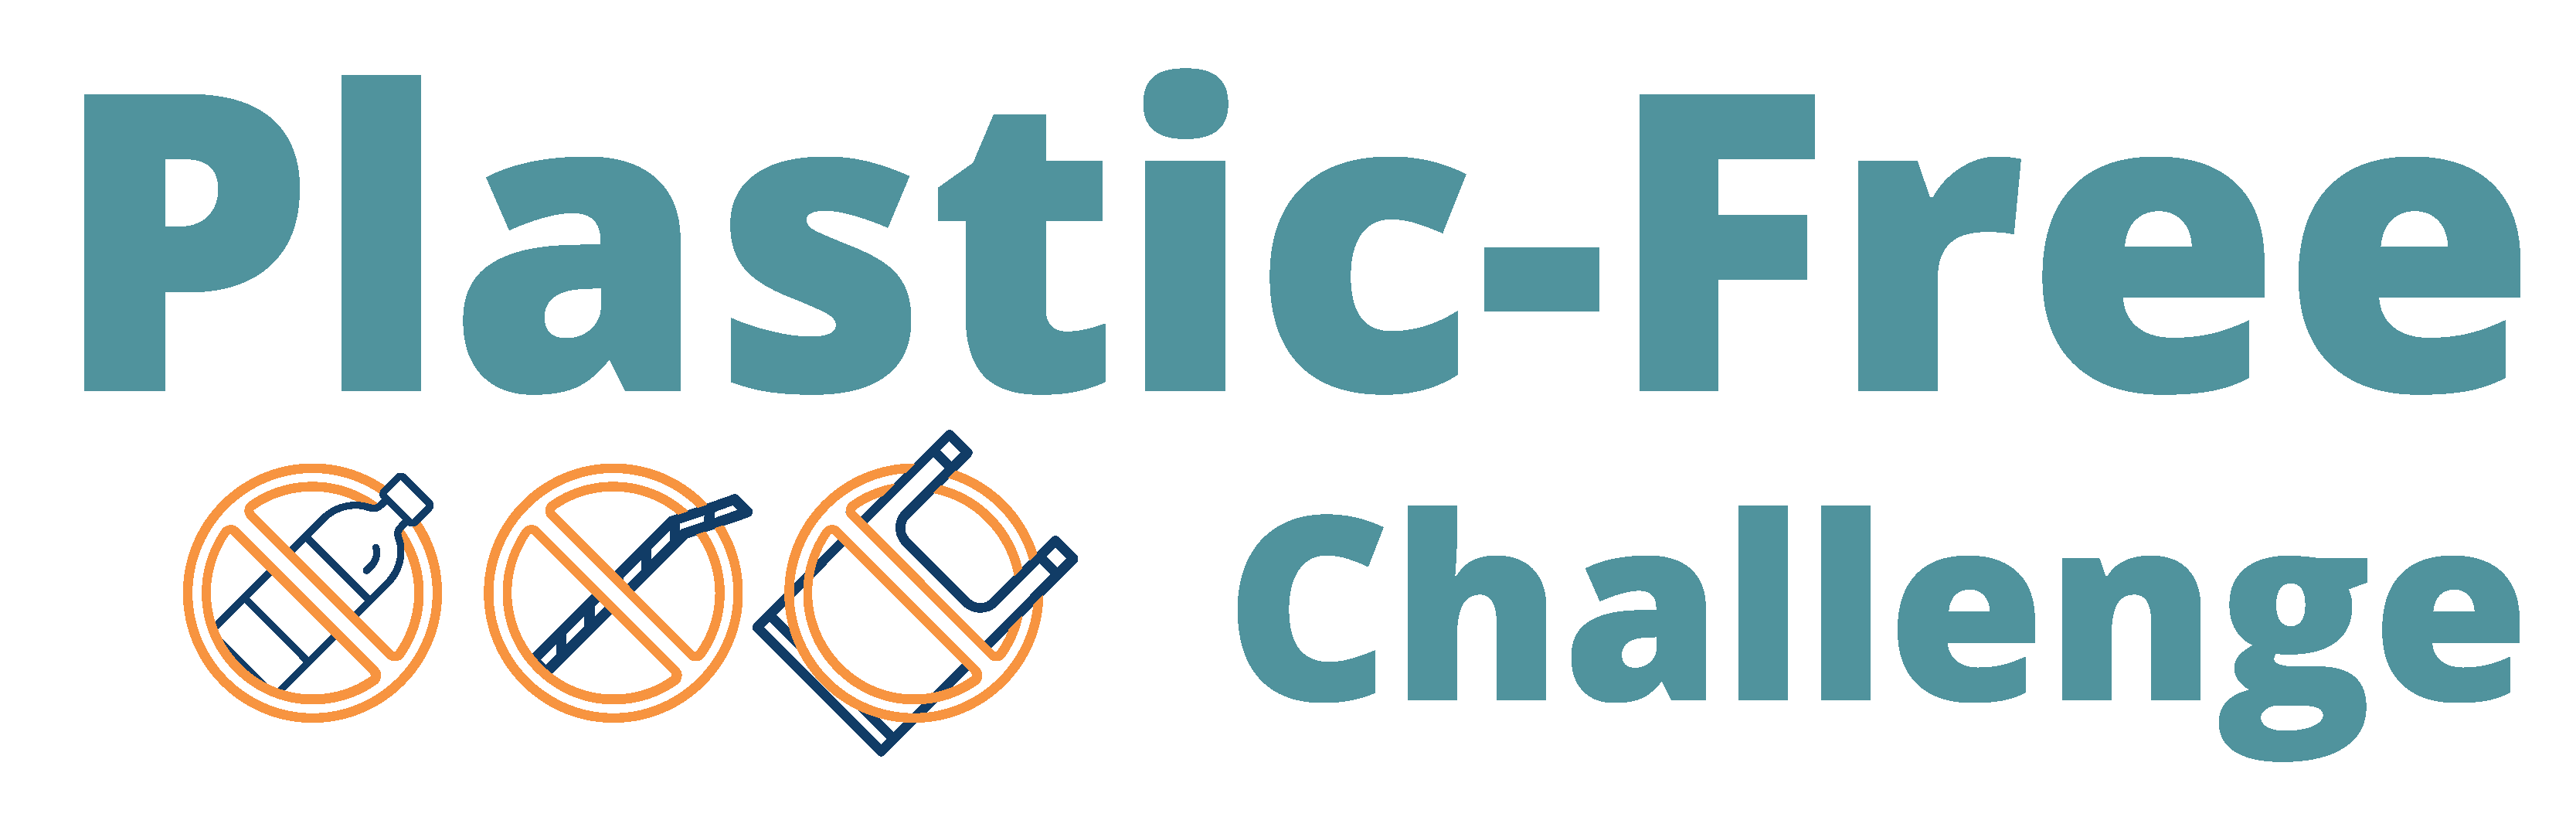 Plastic-Free Challenge - Home Page